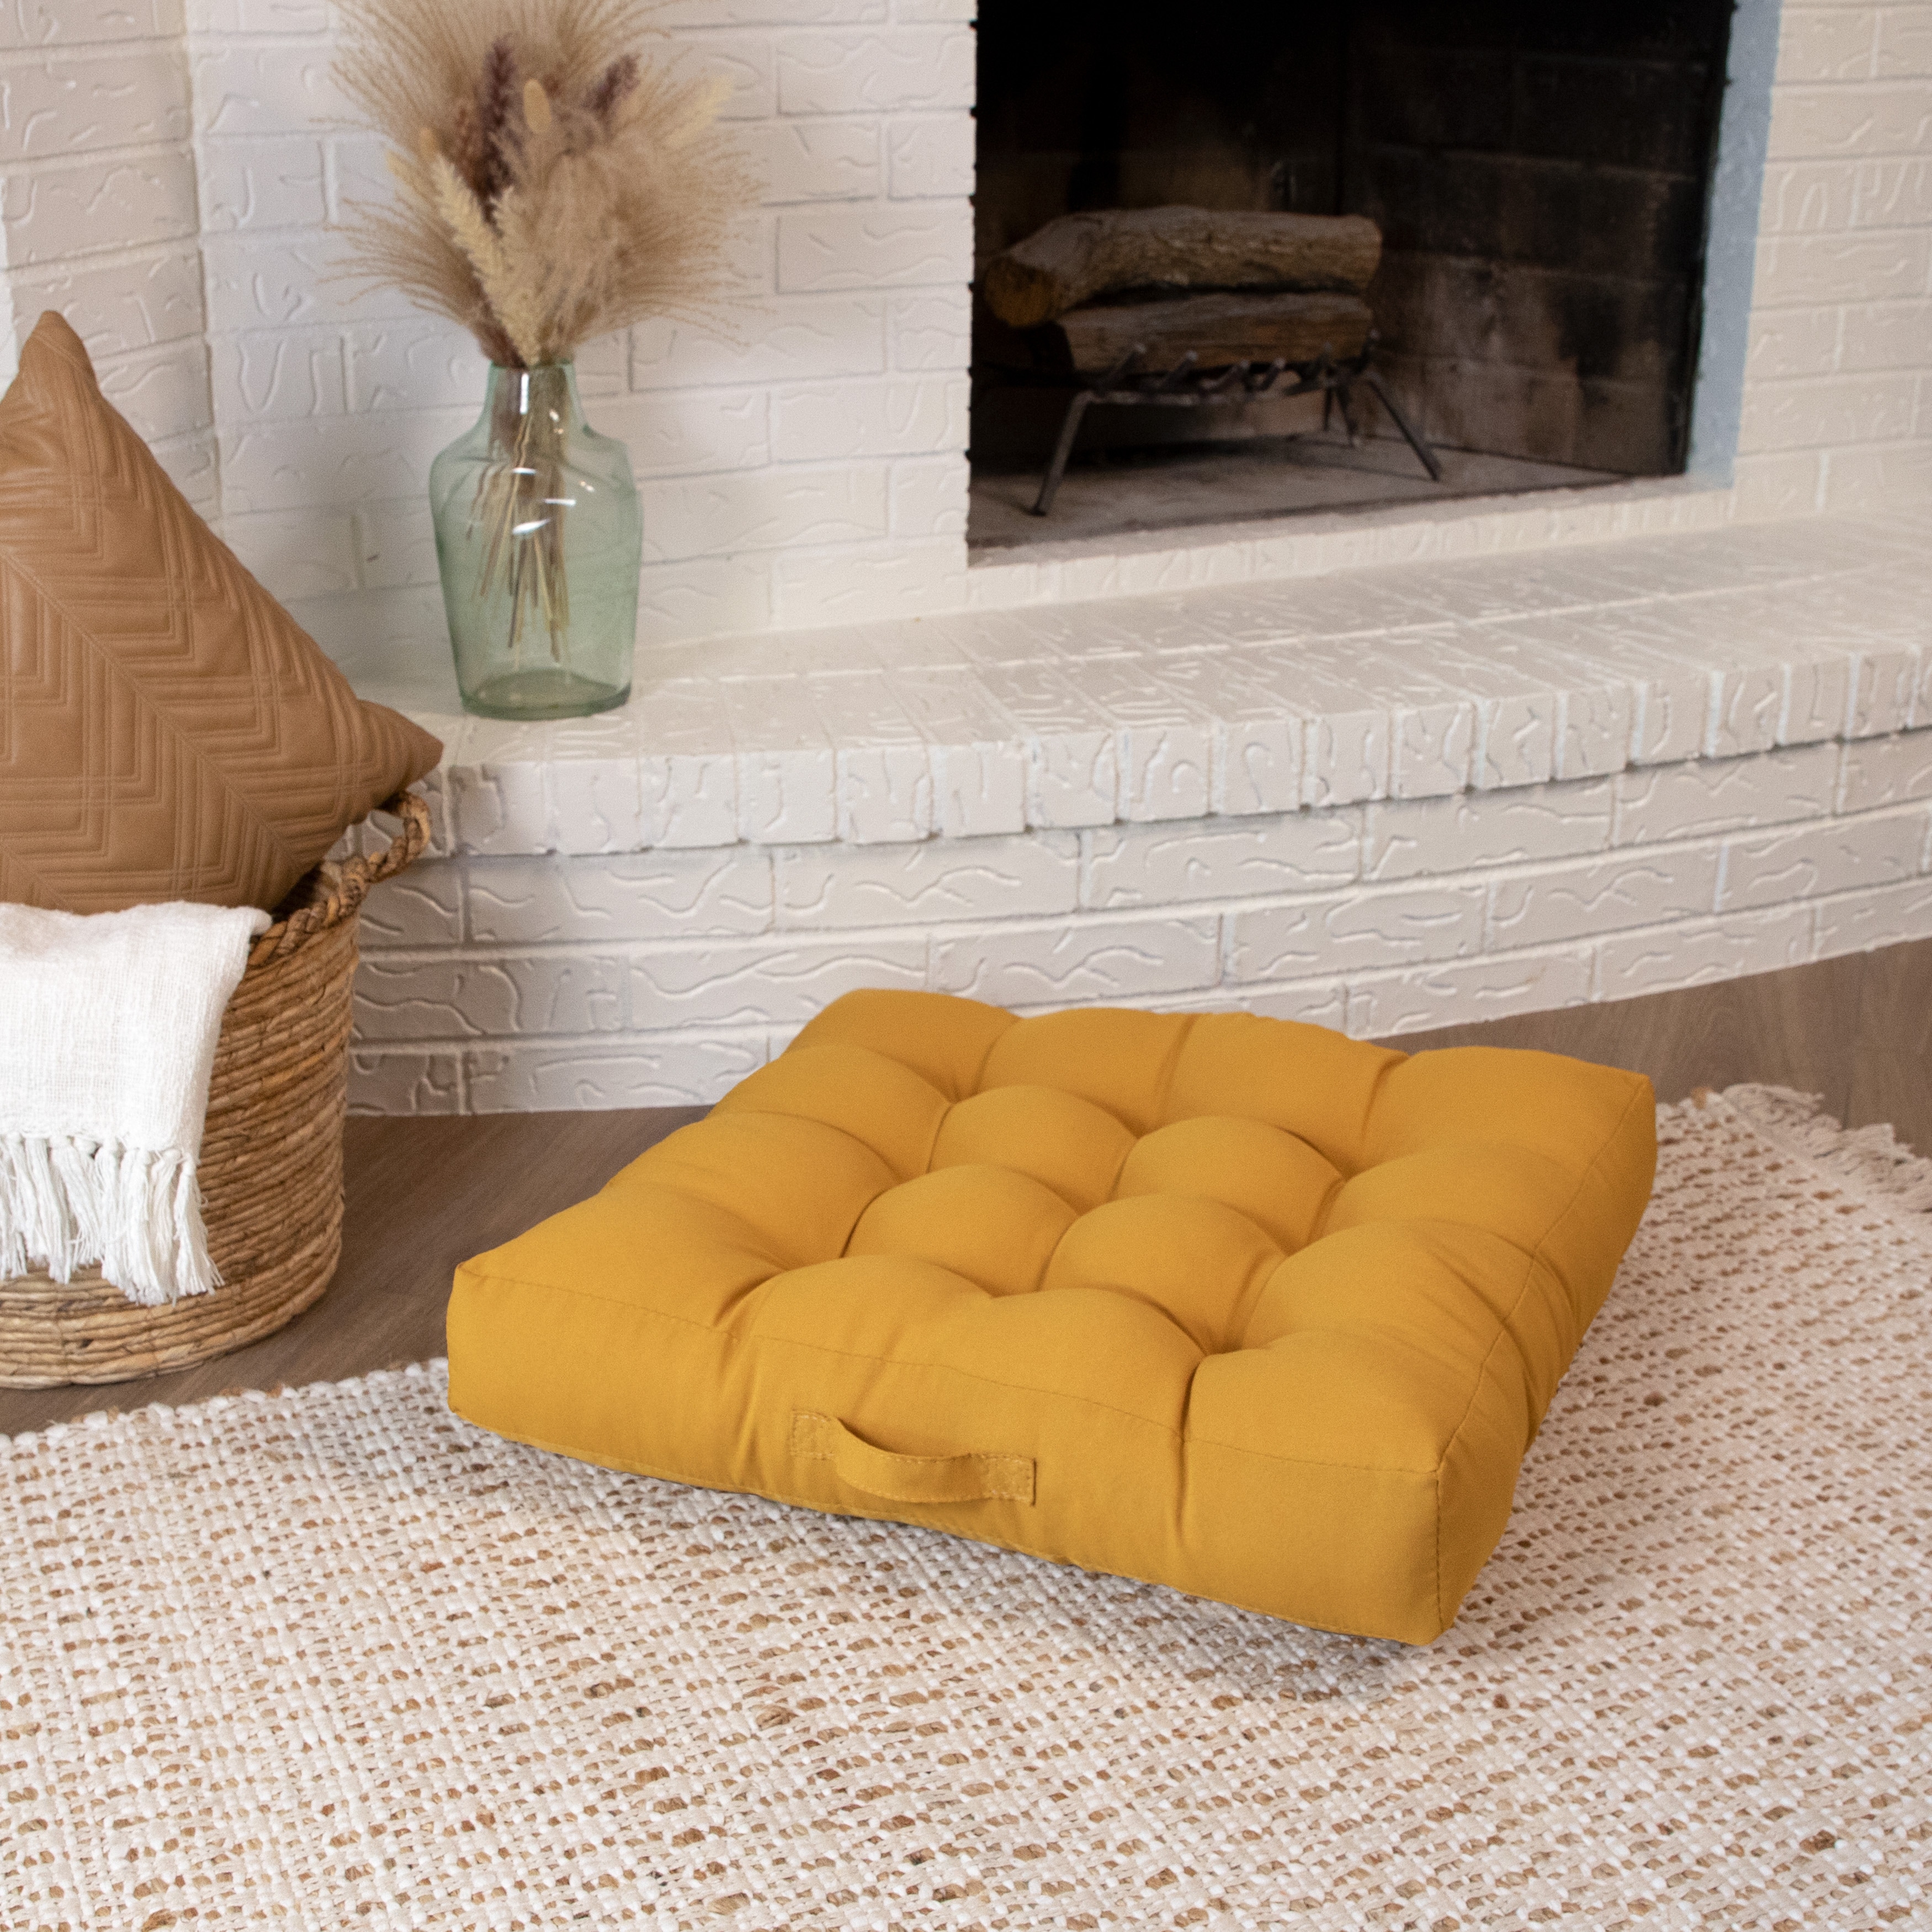 Tufted Floor Seat Cushions Pillows Square 24 x 24 Casual Seating